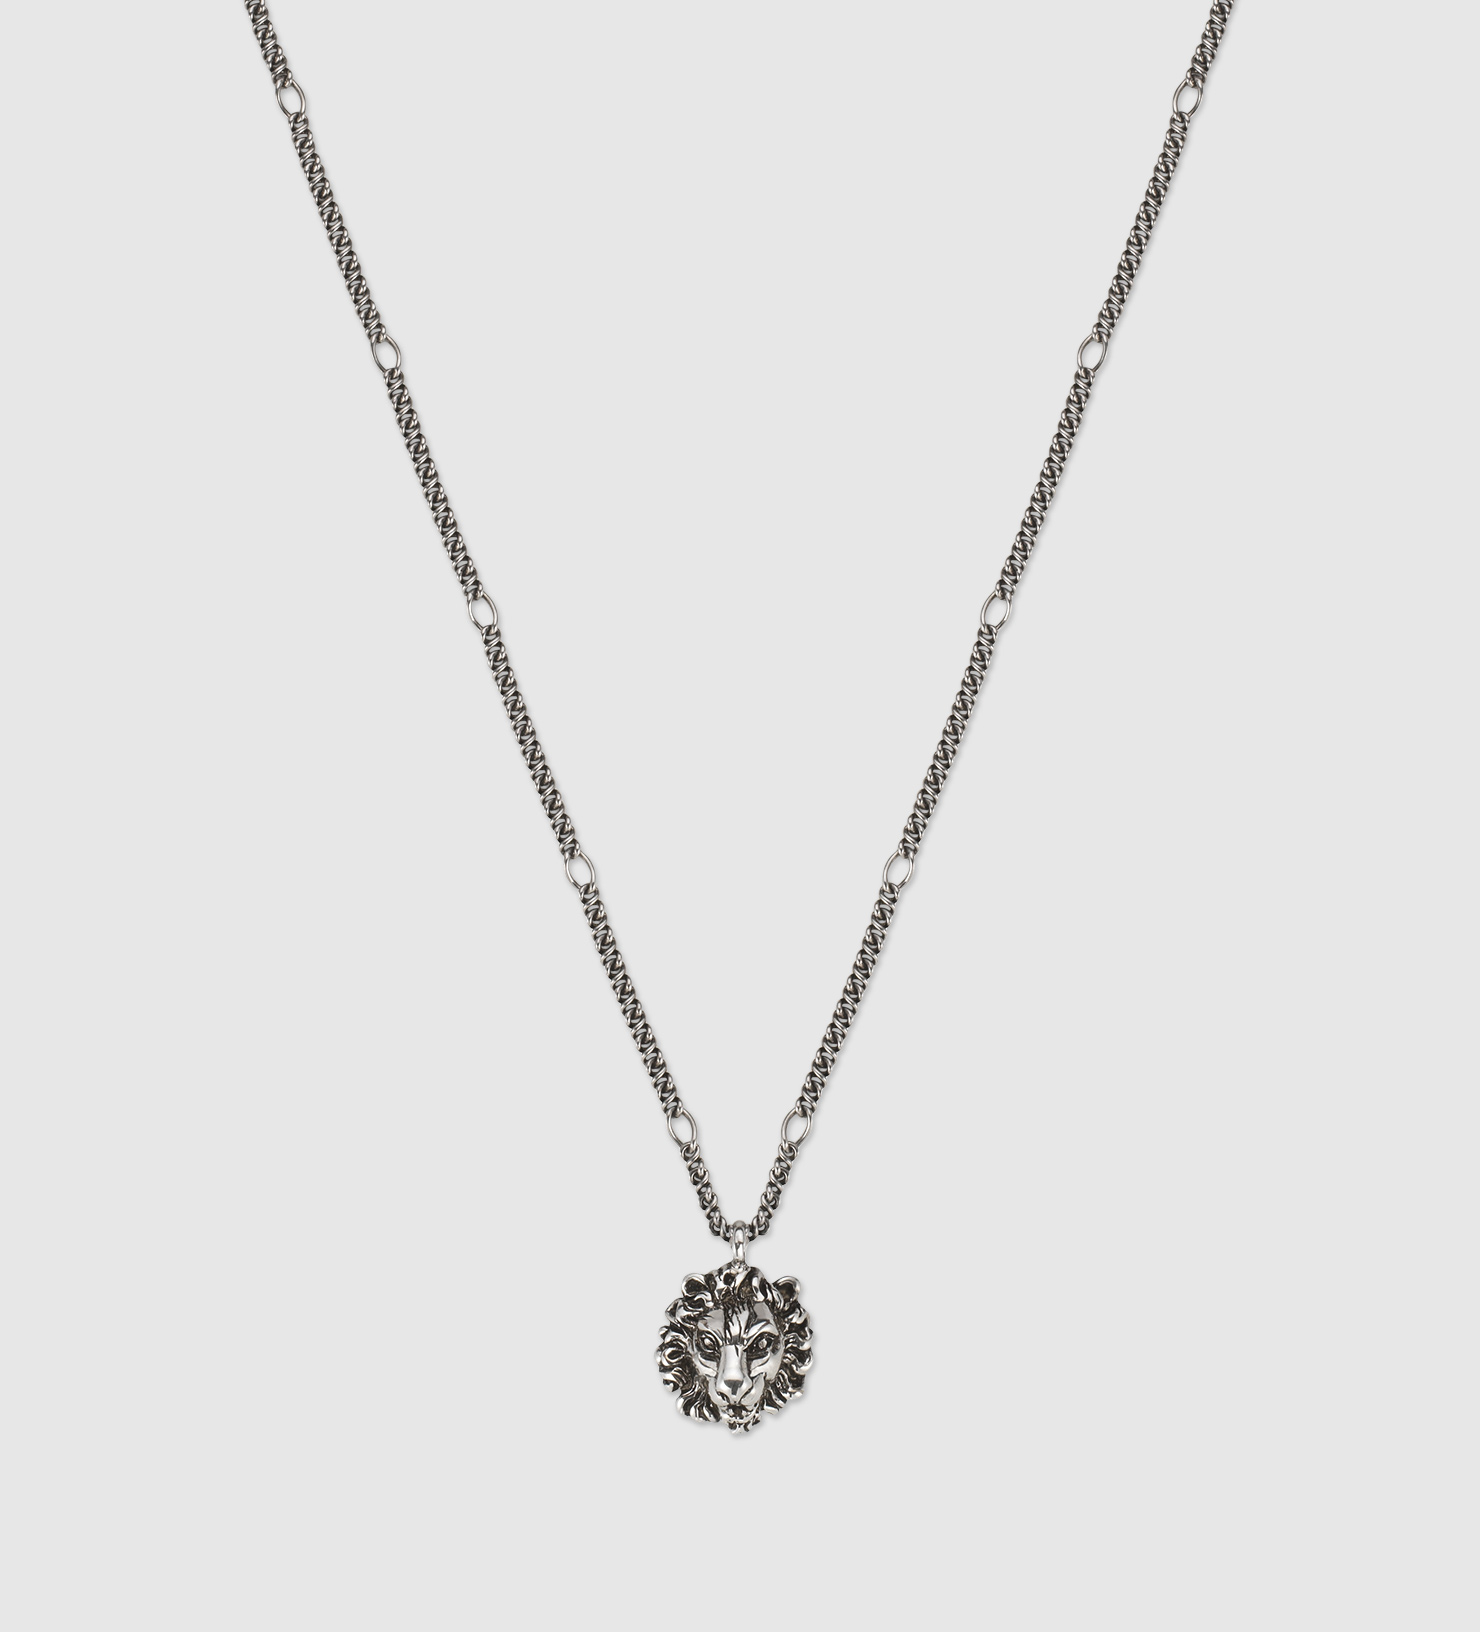 Gucci Necklace With Lion Head Pendant in Metallic for Men | Lyst